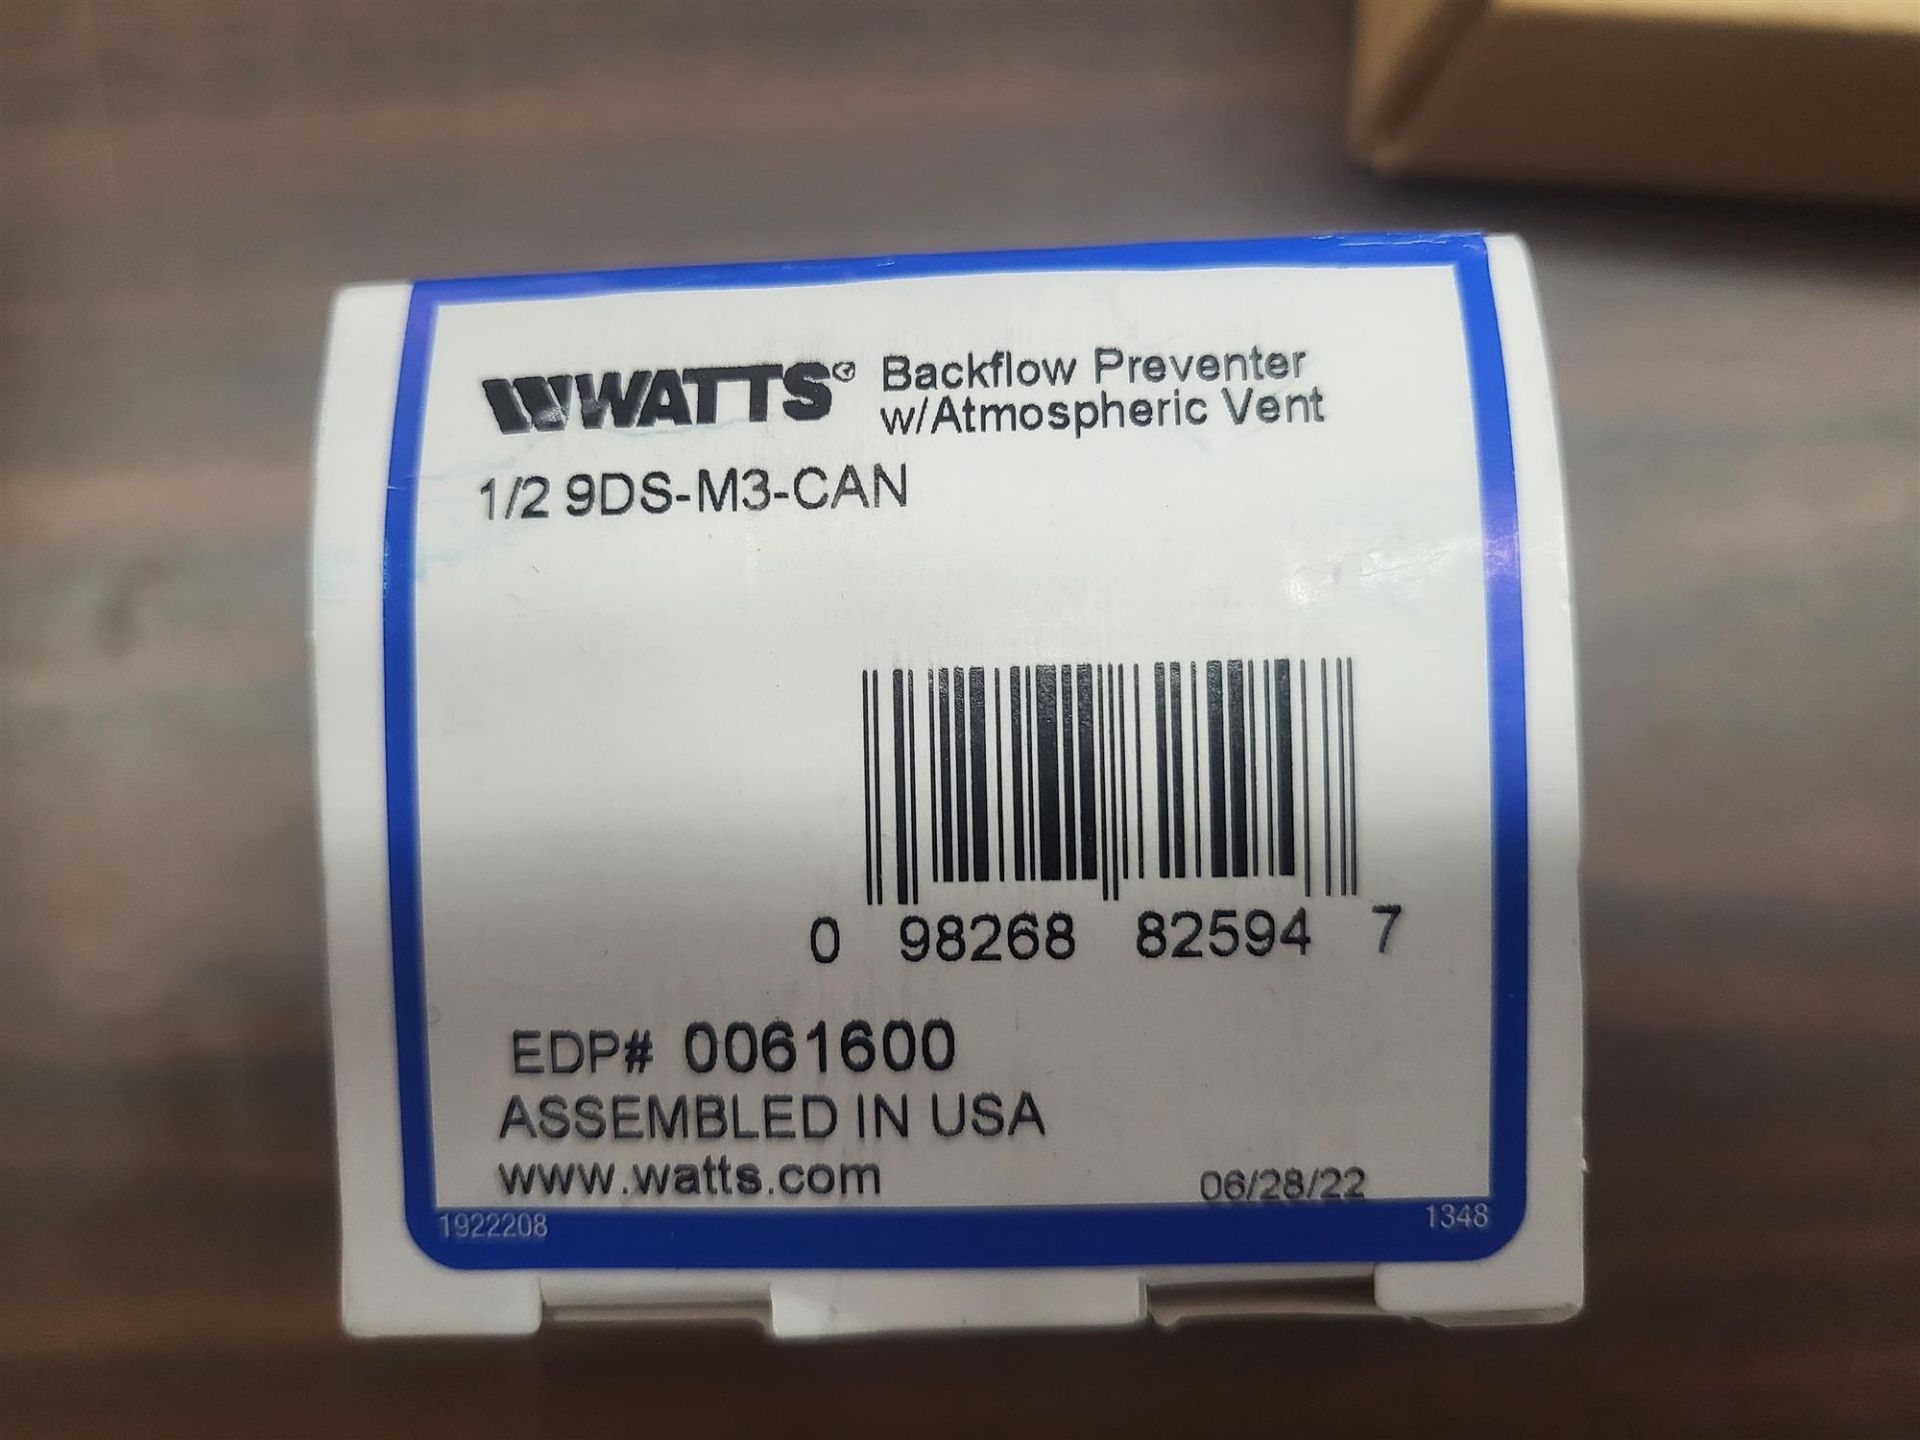 Watts Backflow Preventer w/Atmospheric Vent - Model: 1/2 9DS-M3-CAN